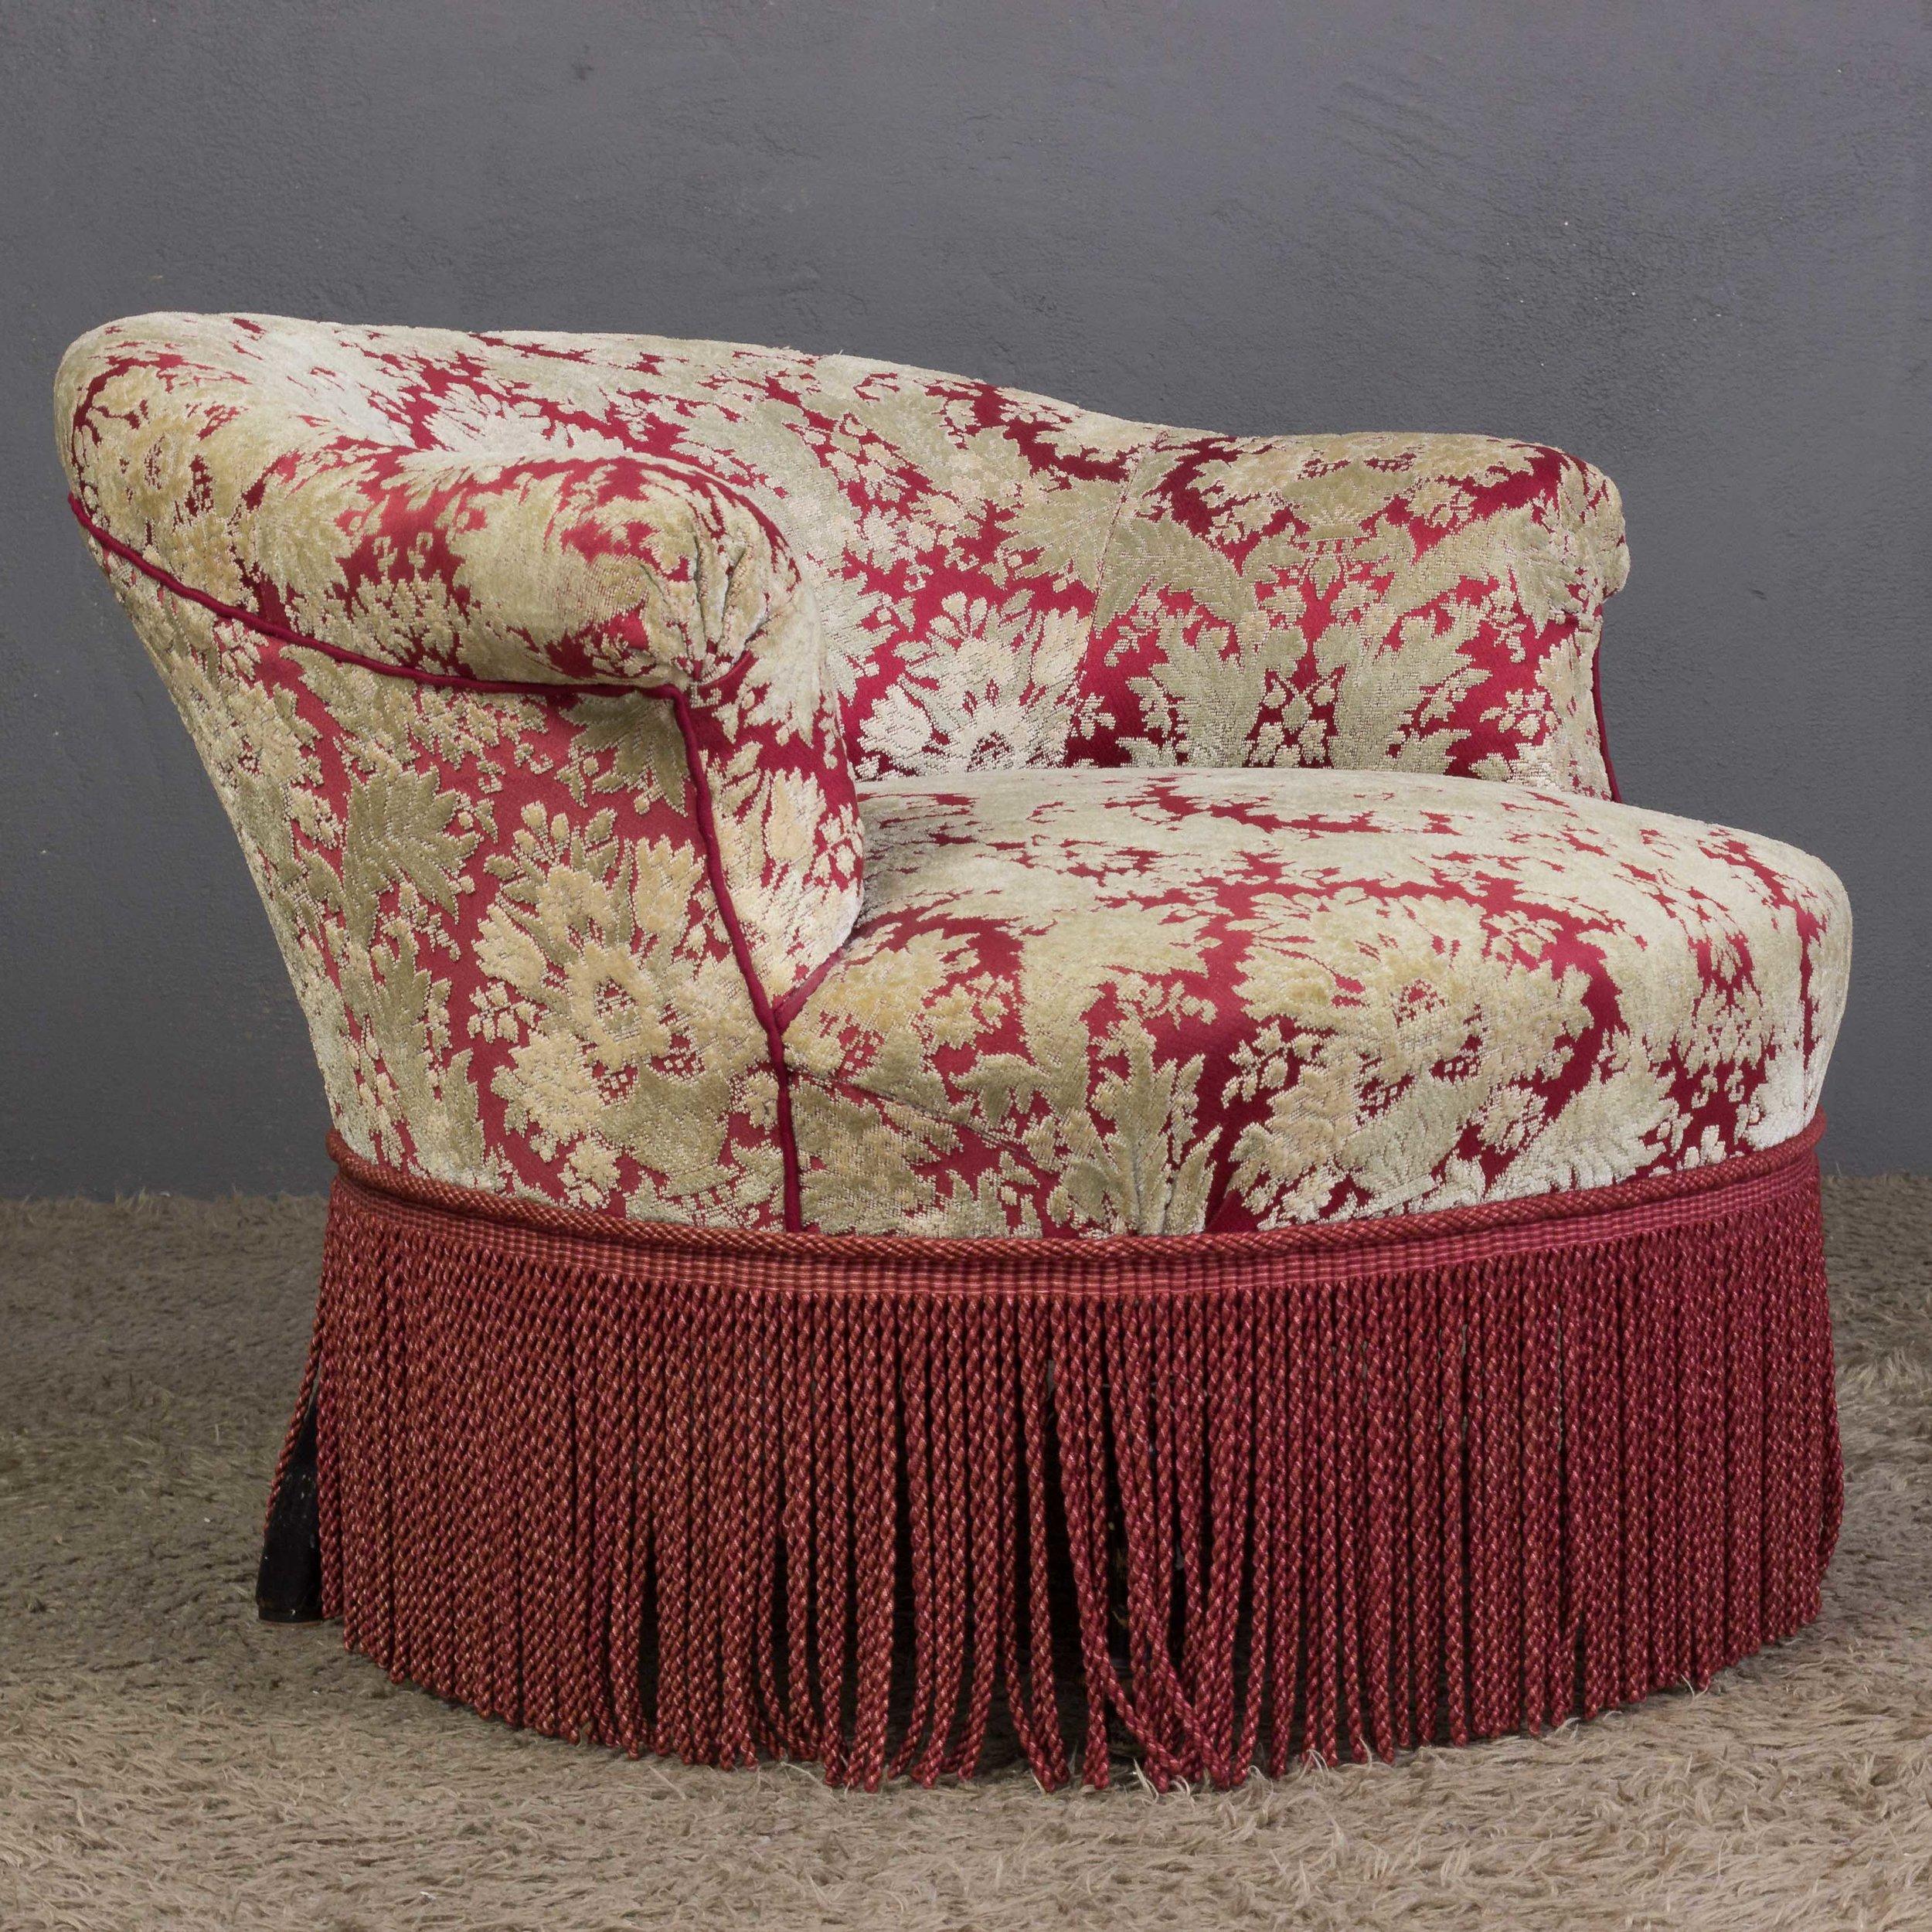 A stunning French Napoleon III slipper chair. This slipper chair is a truly unique piece, with its vintage floral fabric and bullion fringe providing an eye-catching contrast. In good vintage condition, this chair is sure to be a statement piece in